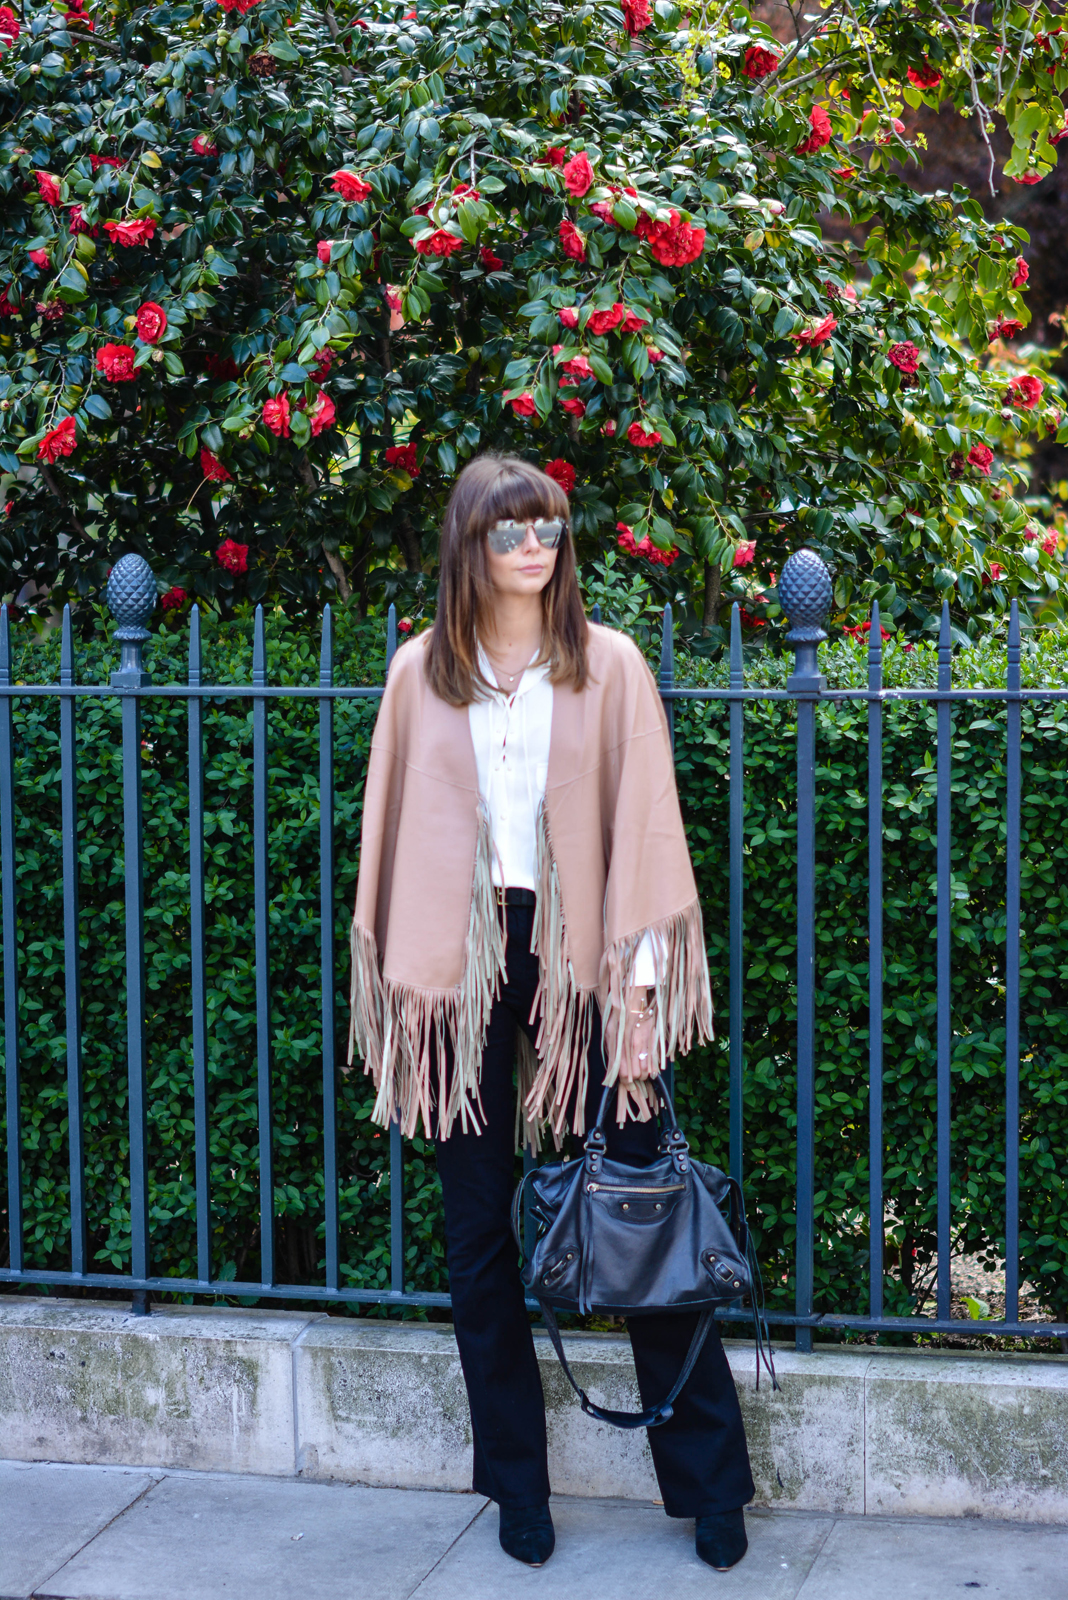 EJSTYLE - Emma Hill, Romwe nude leather fringe poncho cape, Black Next flare jeans, Balenciaga bag, Zara lace up tie shirt, polarised aviator sunglasses, OOTD, 70's trend